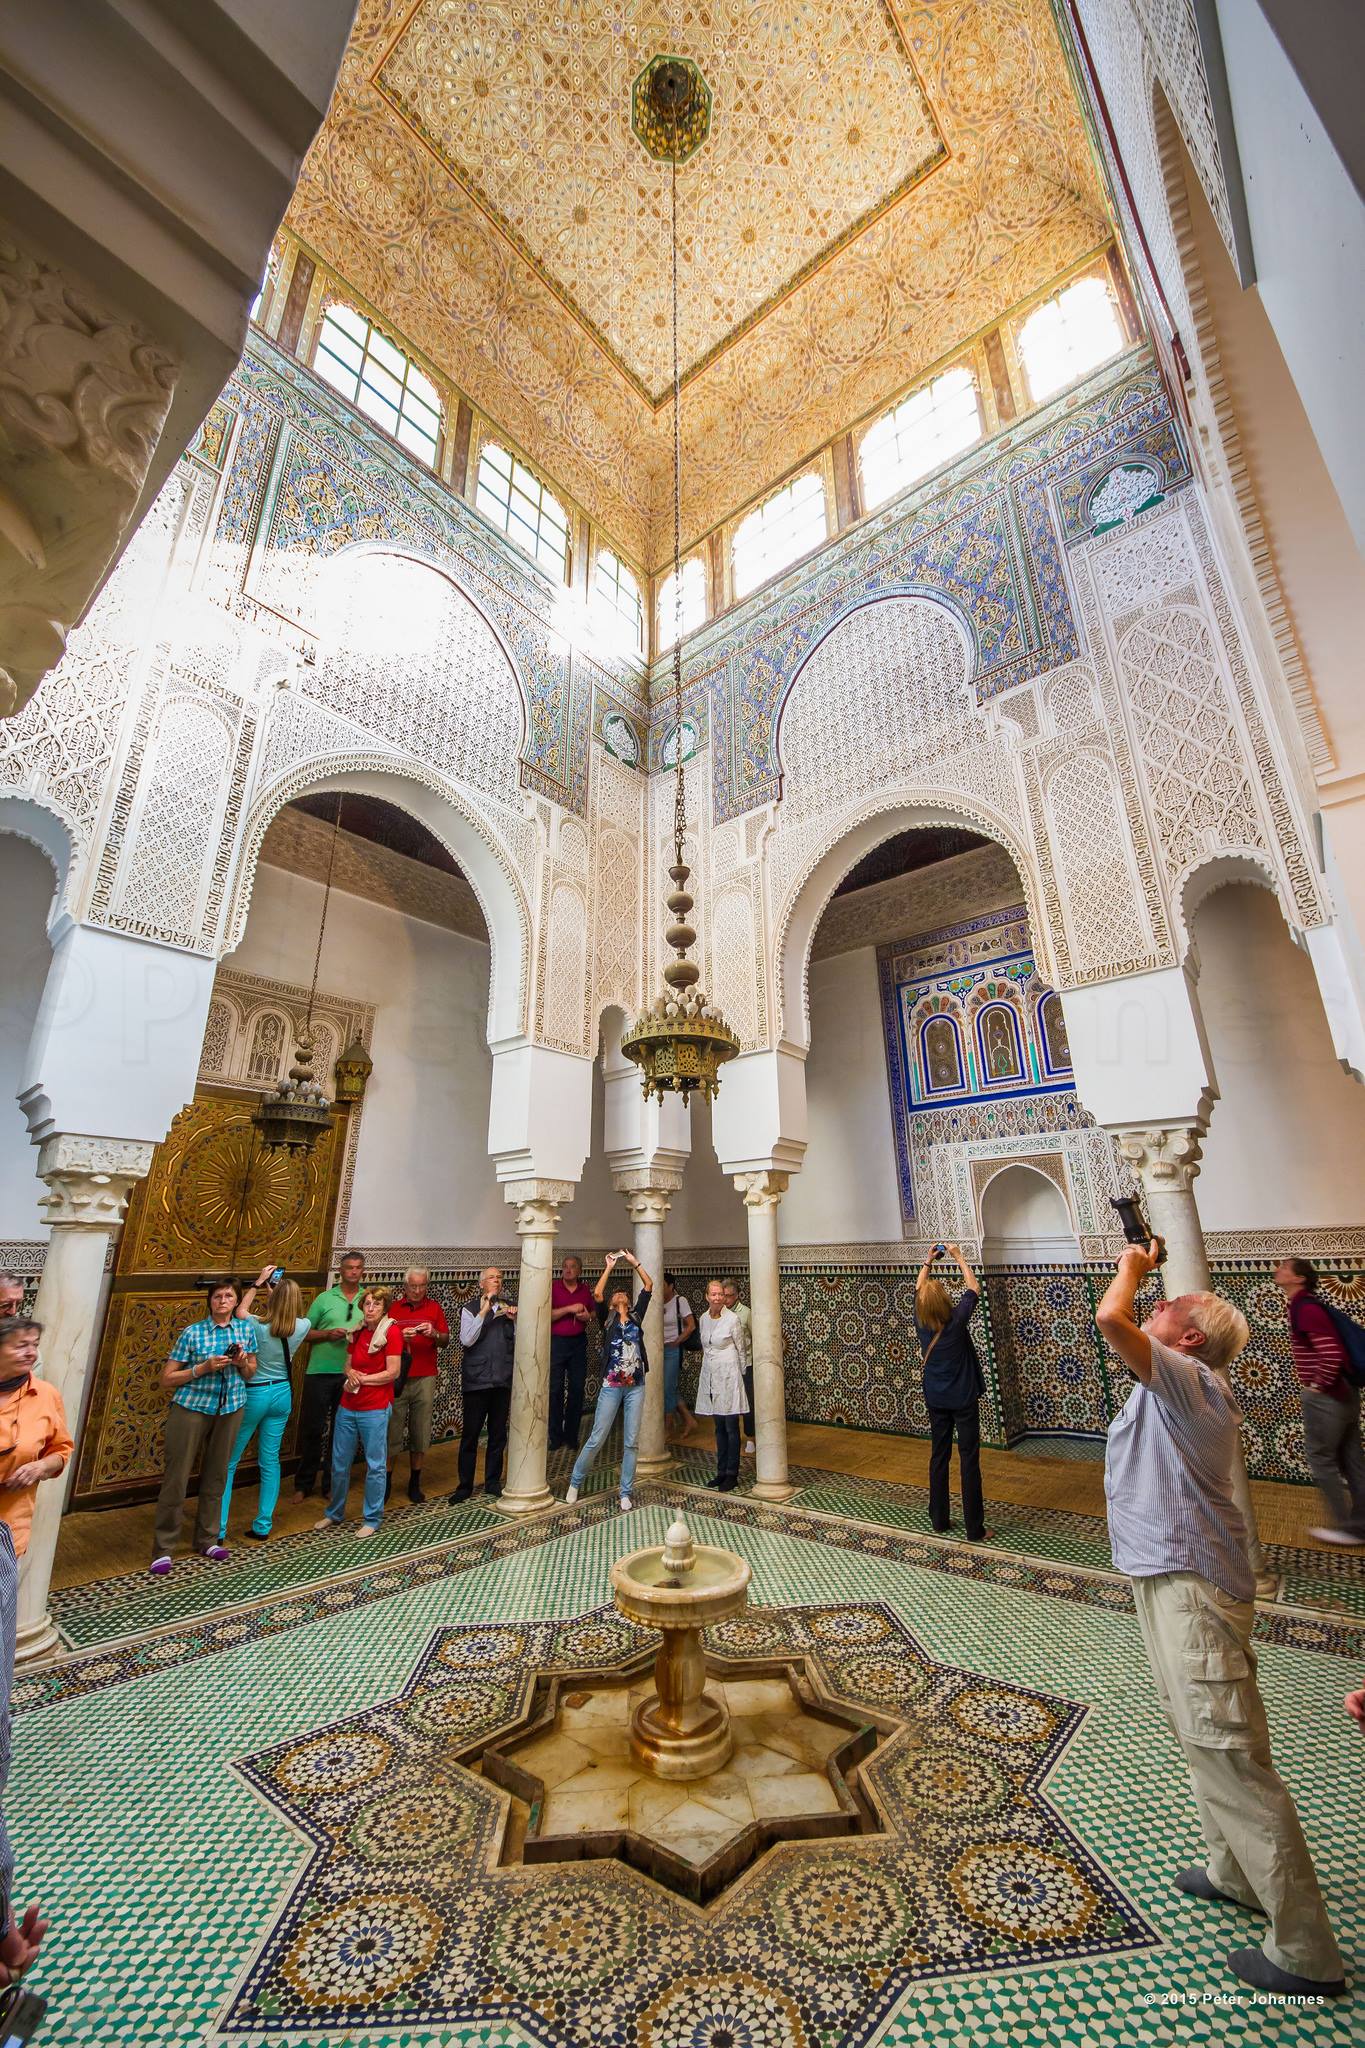 Inside Mausoleum of Moulay Ismail in Meknes with tourists